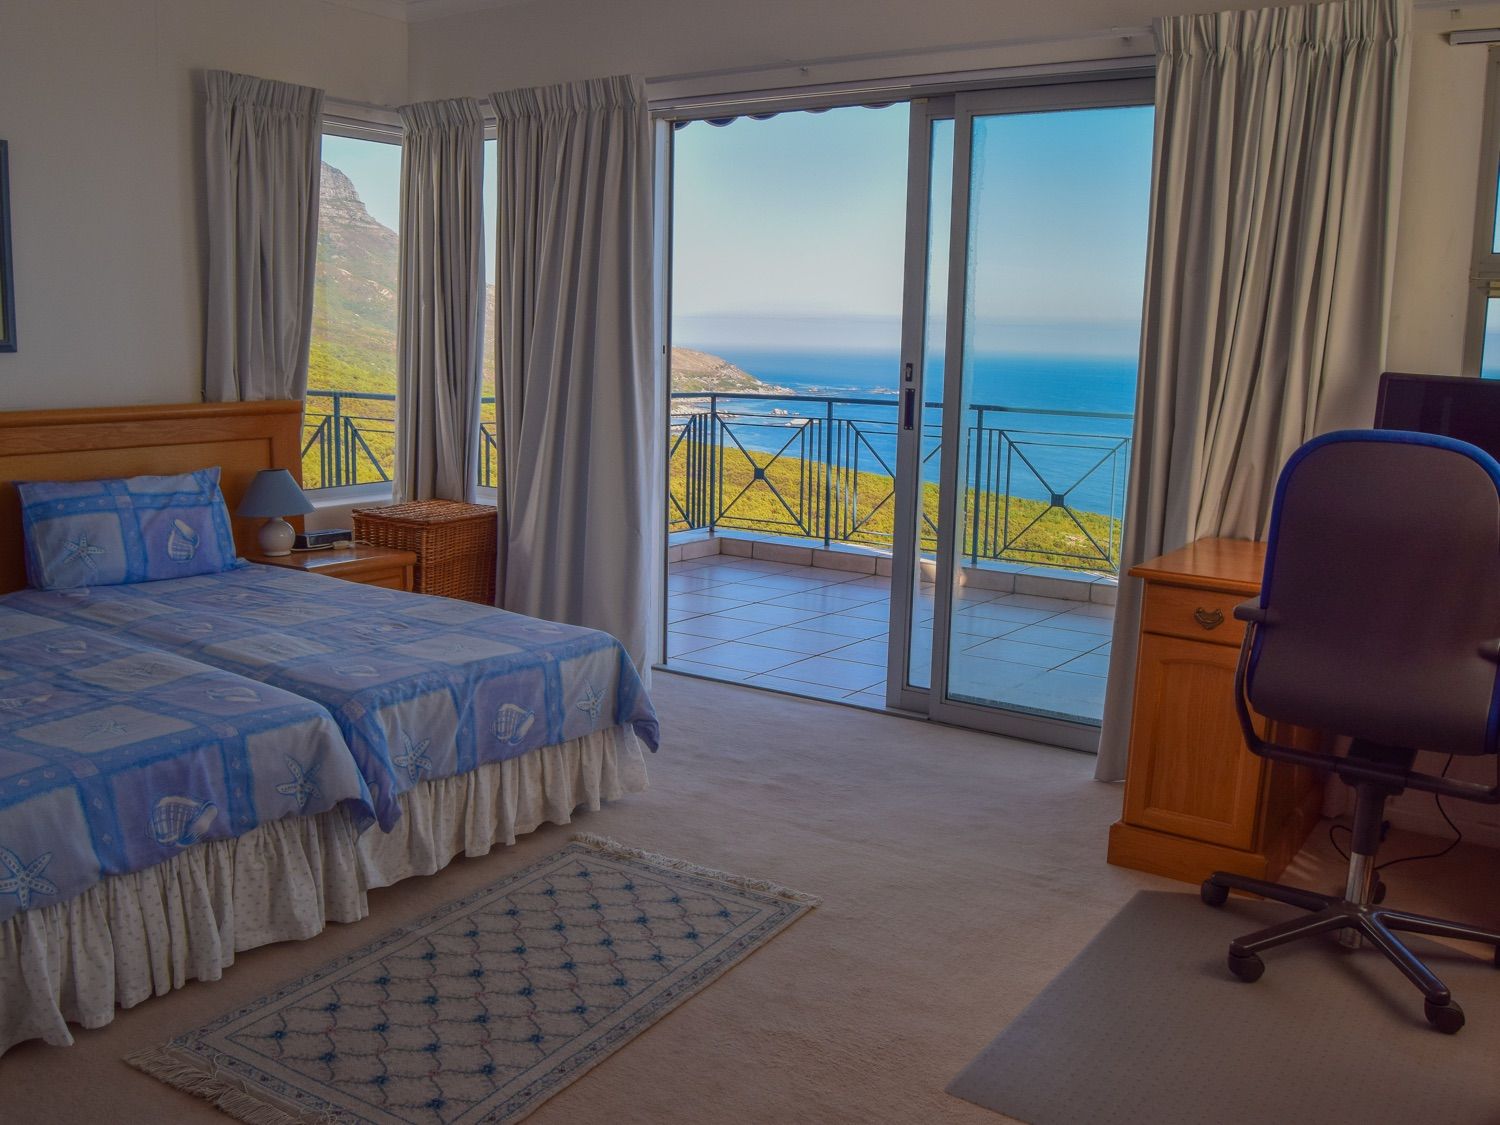 Photo 16 of Oceanscape Camps Bay accommodation in Camps Bay, Cape Town with 4 bedrooms and 4 bathrooms